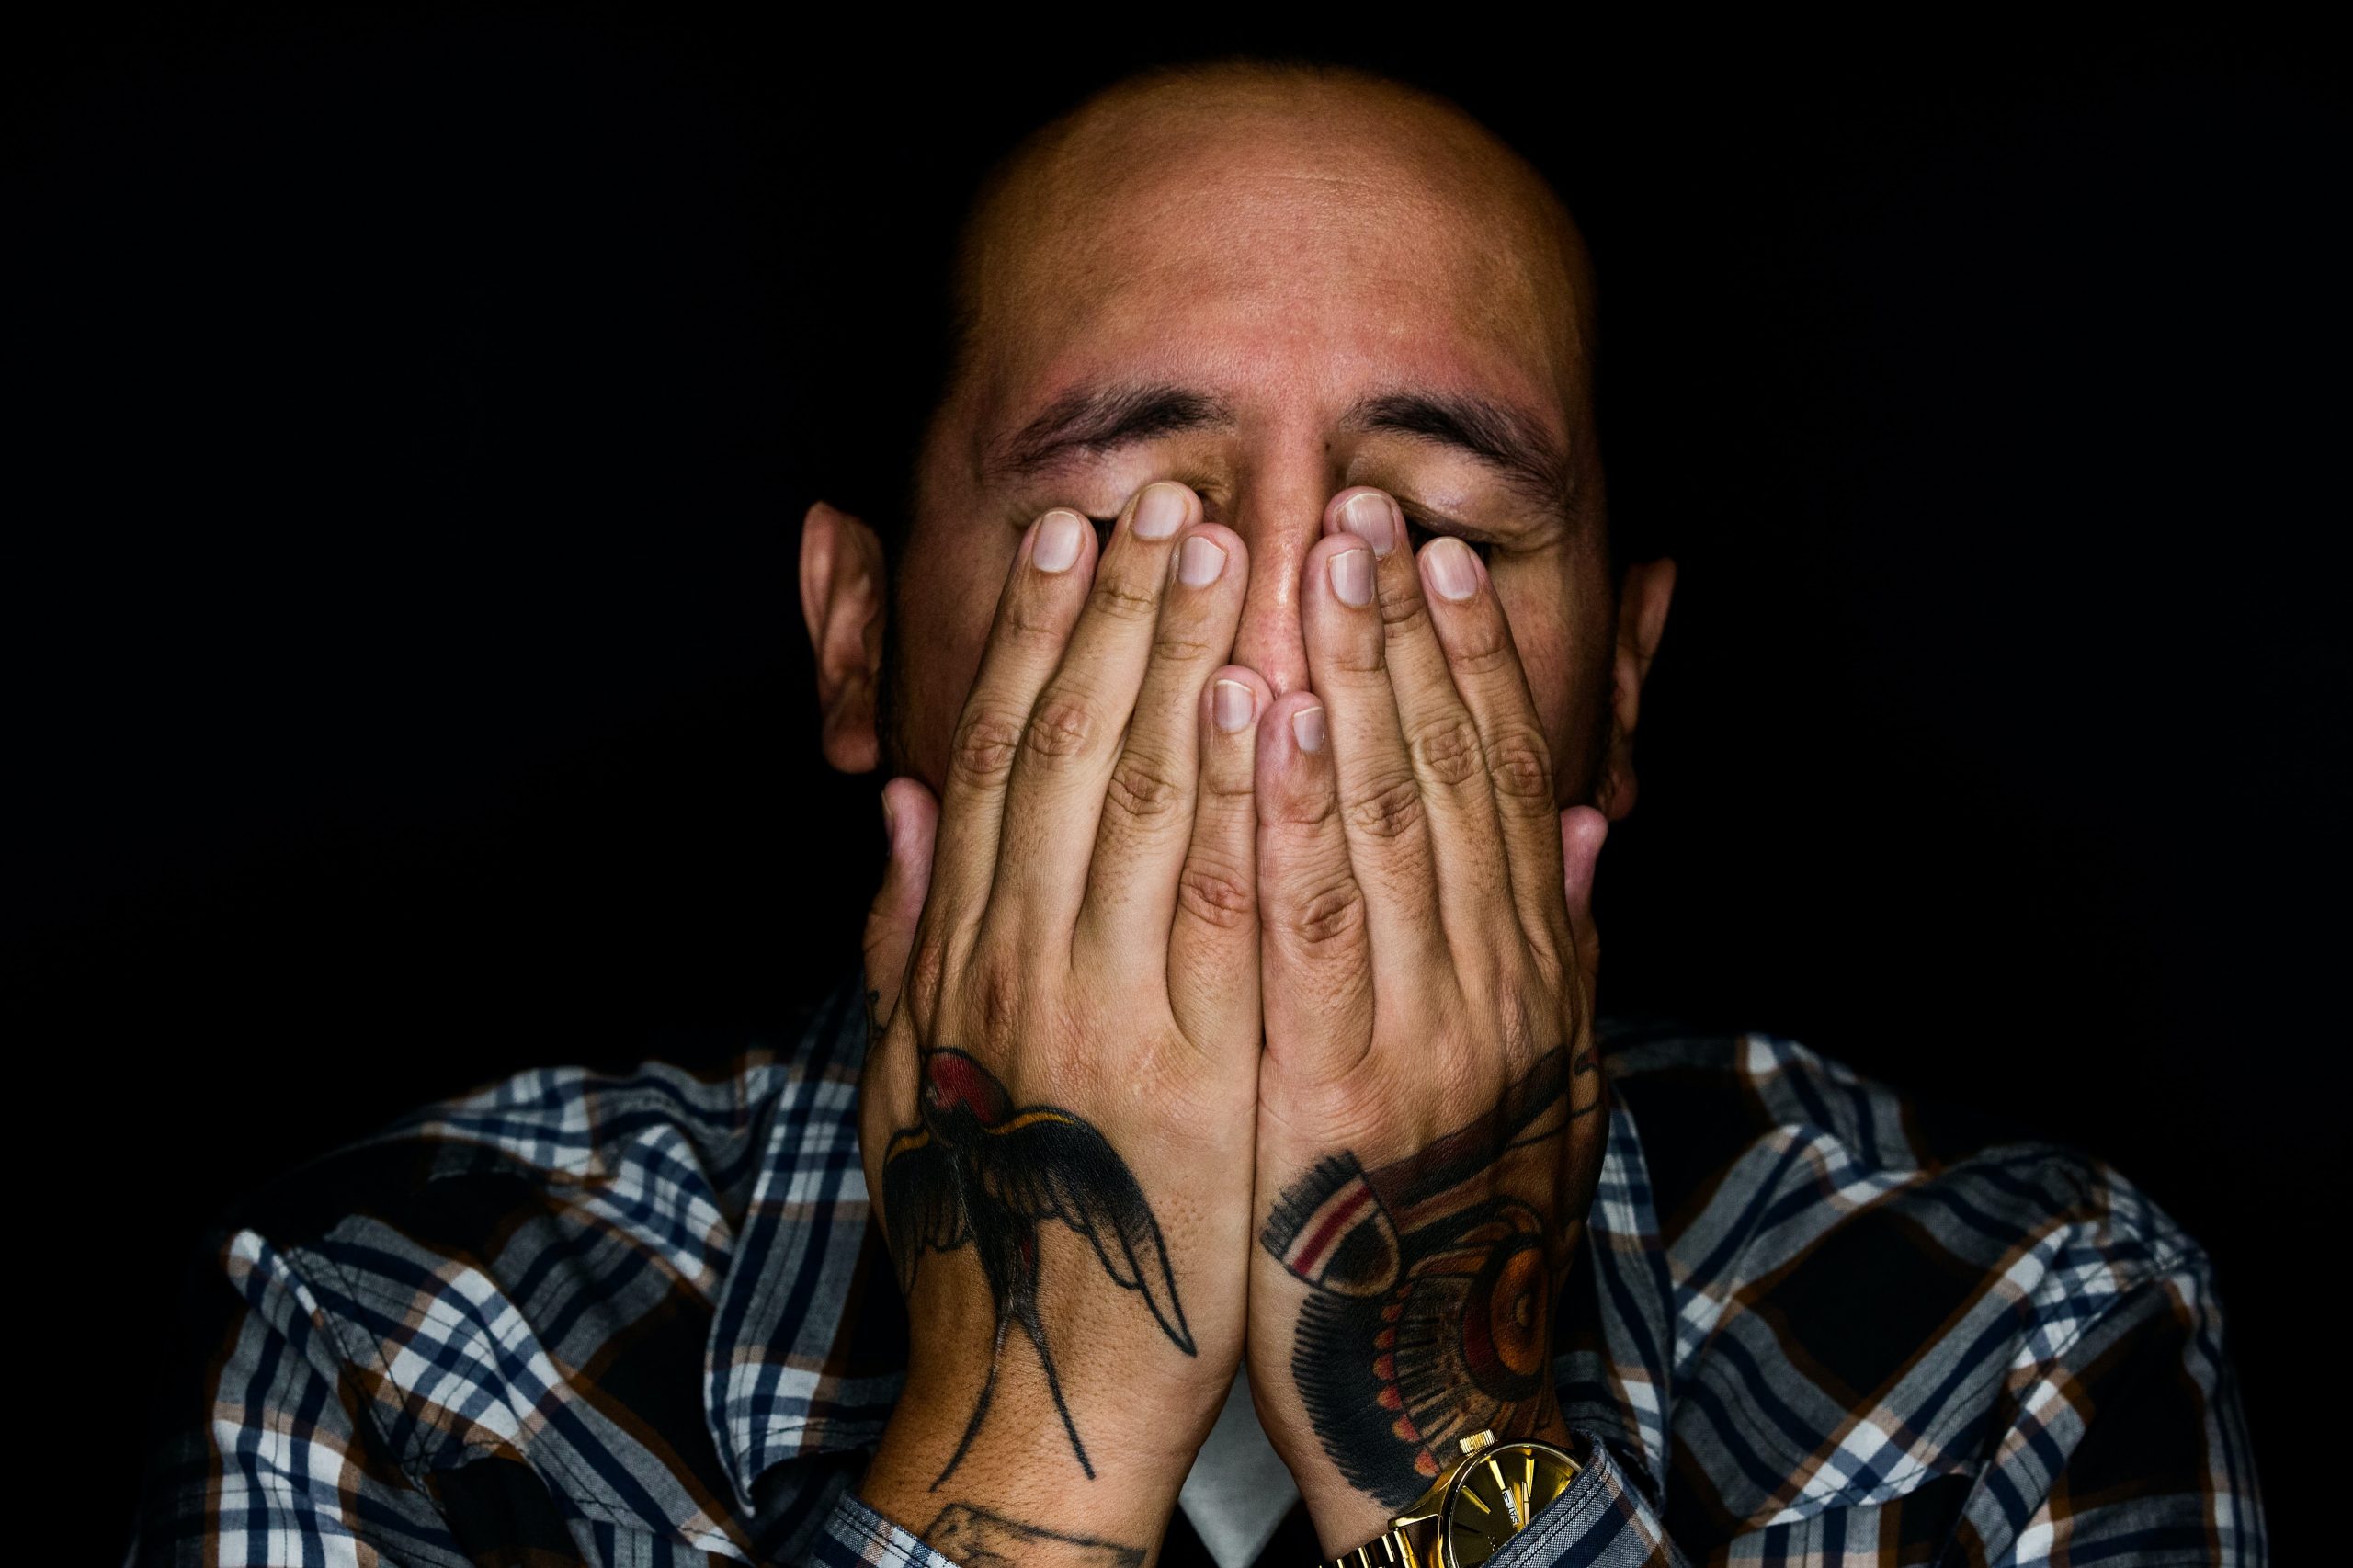 A man with swallow tattoos on his hands clasps them to his face in despair. He is wearing a blue checkered shirt against a black background.